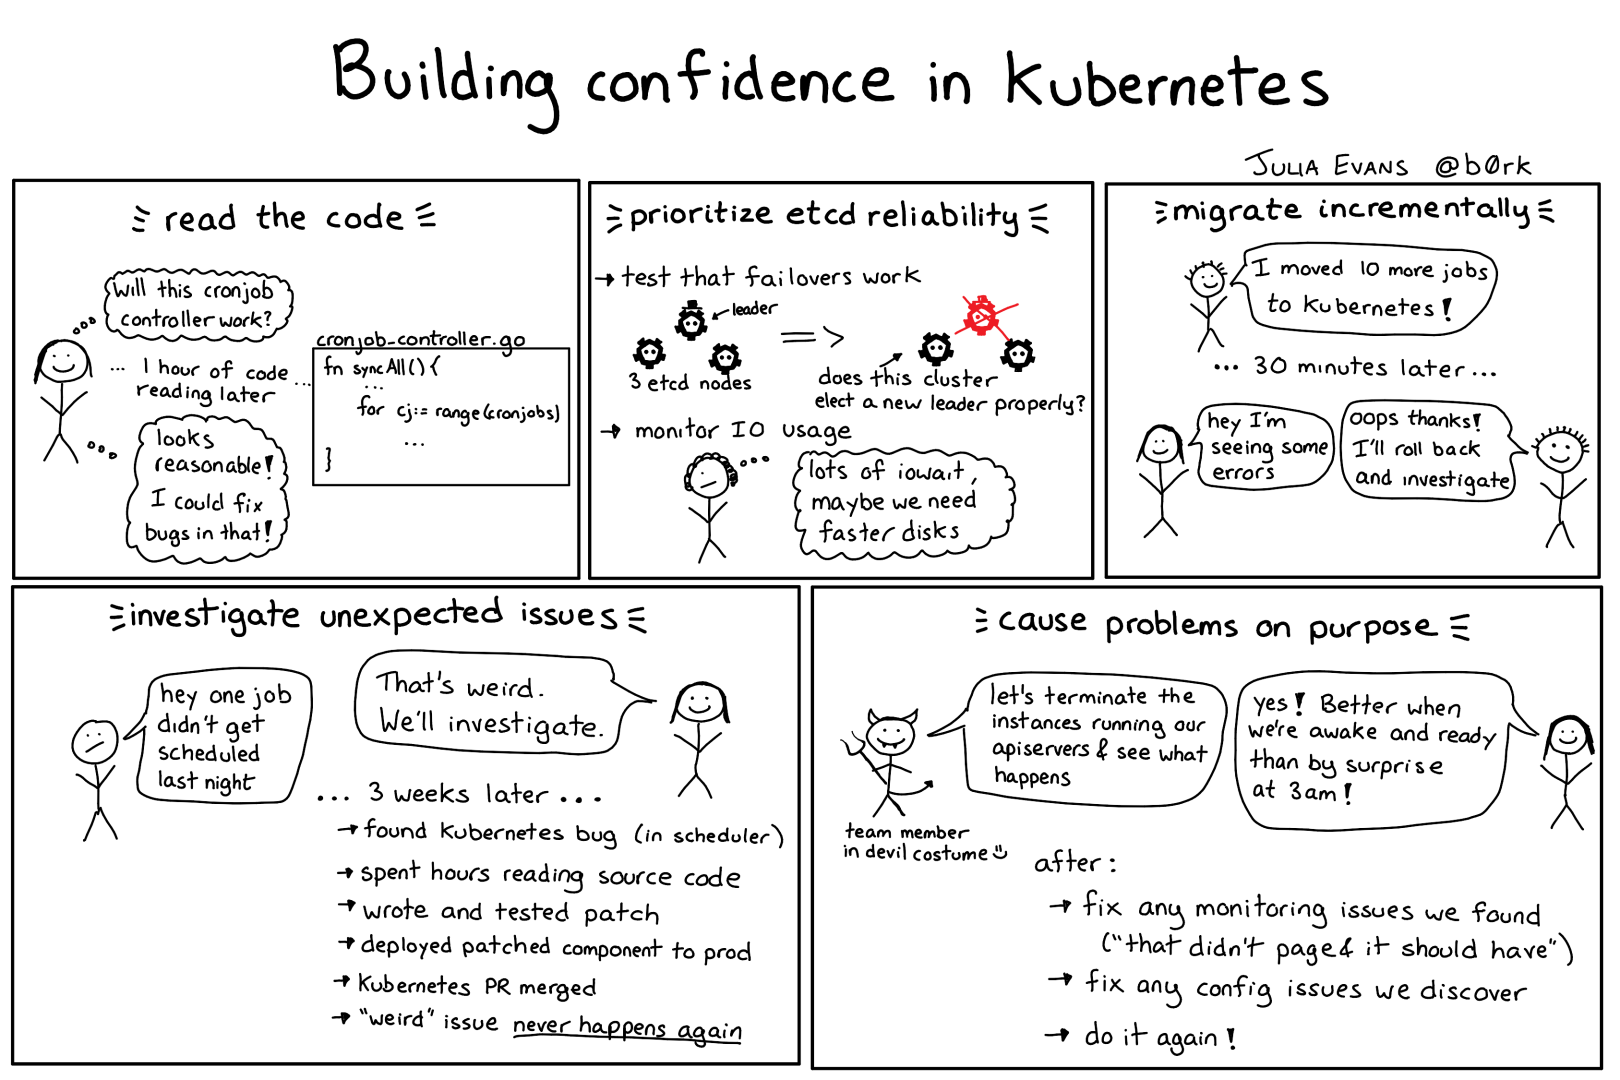 Building confidence in Kubernetes